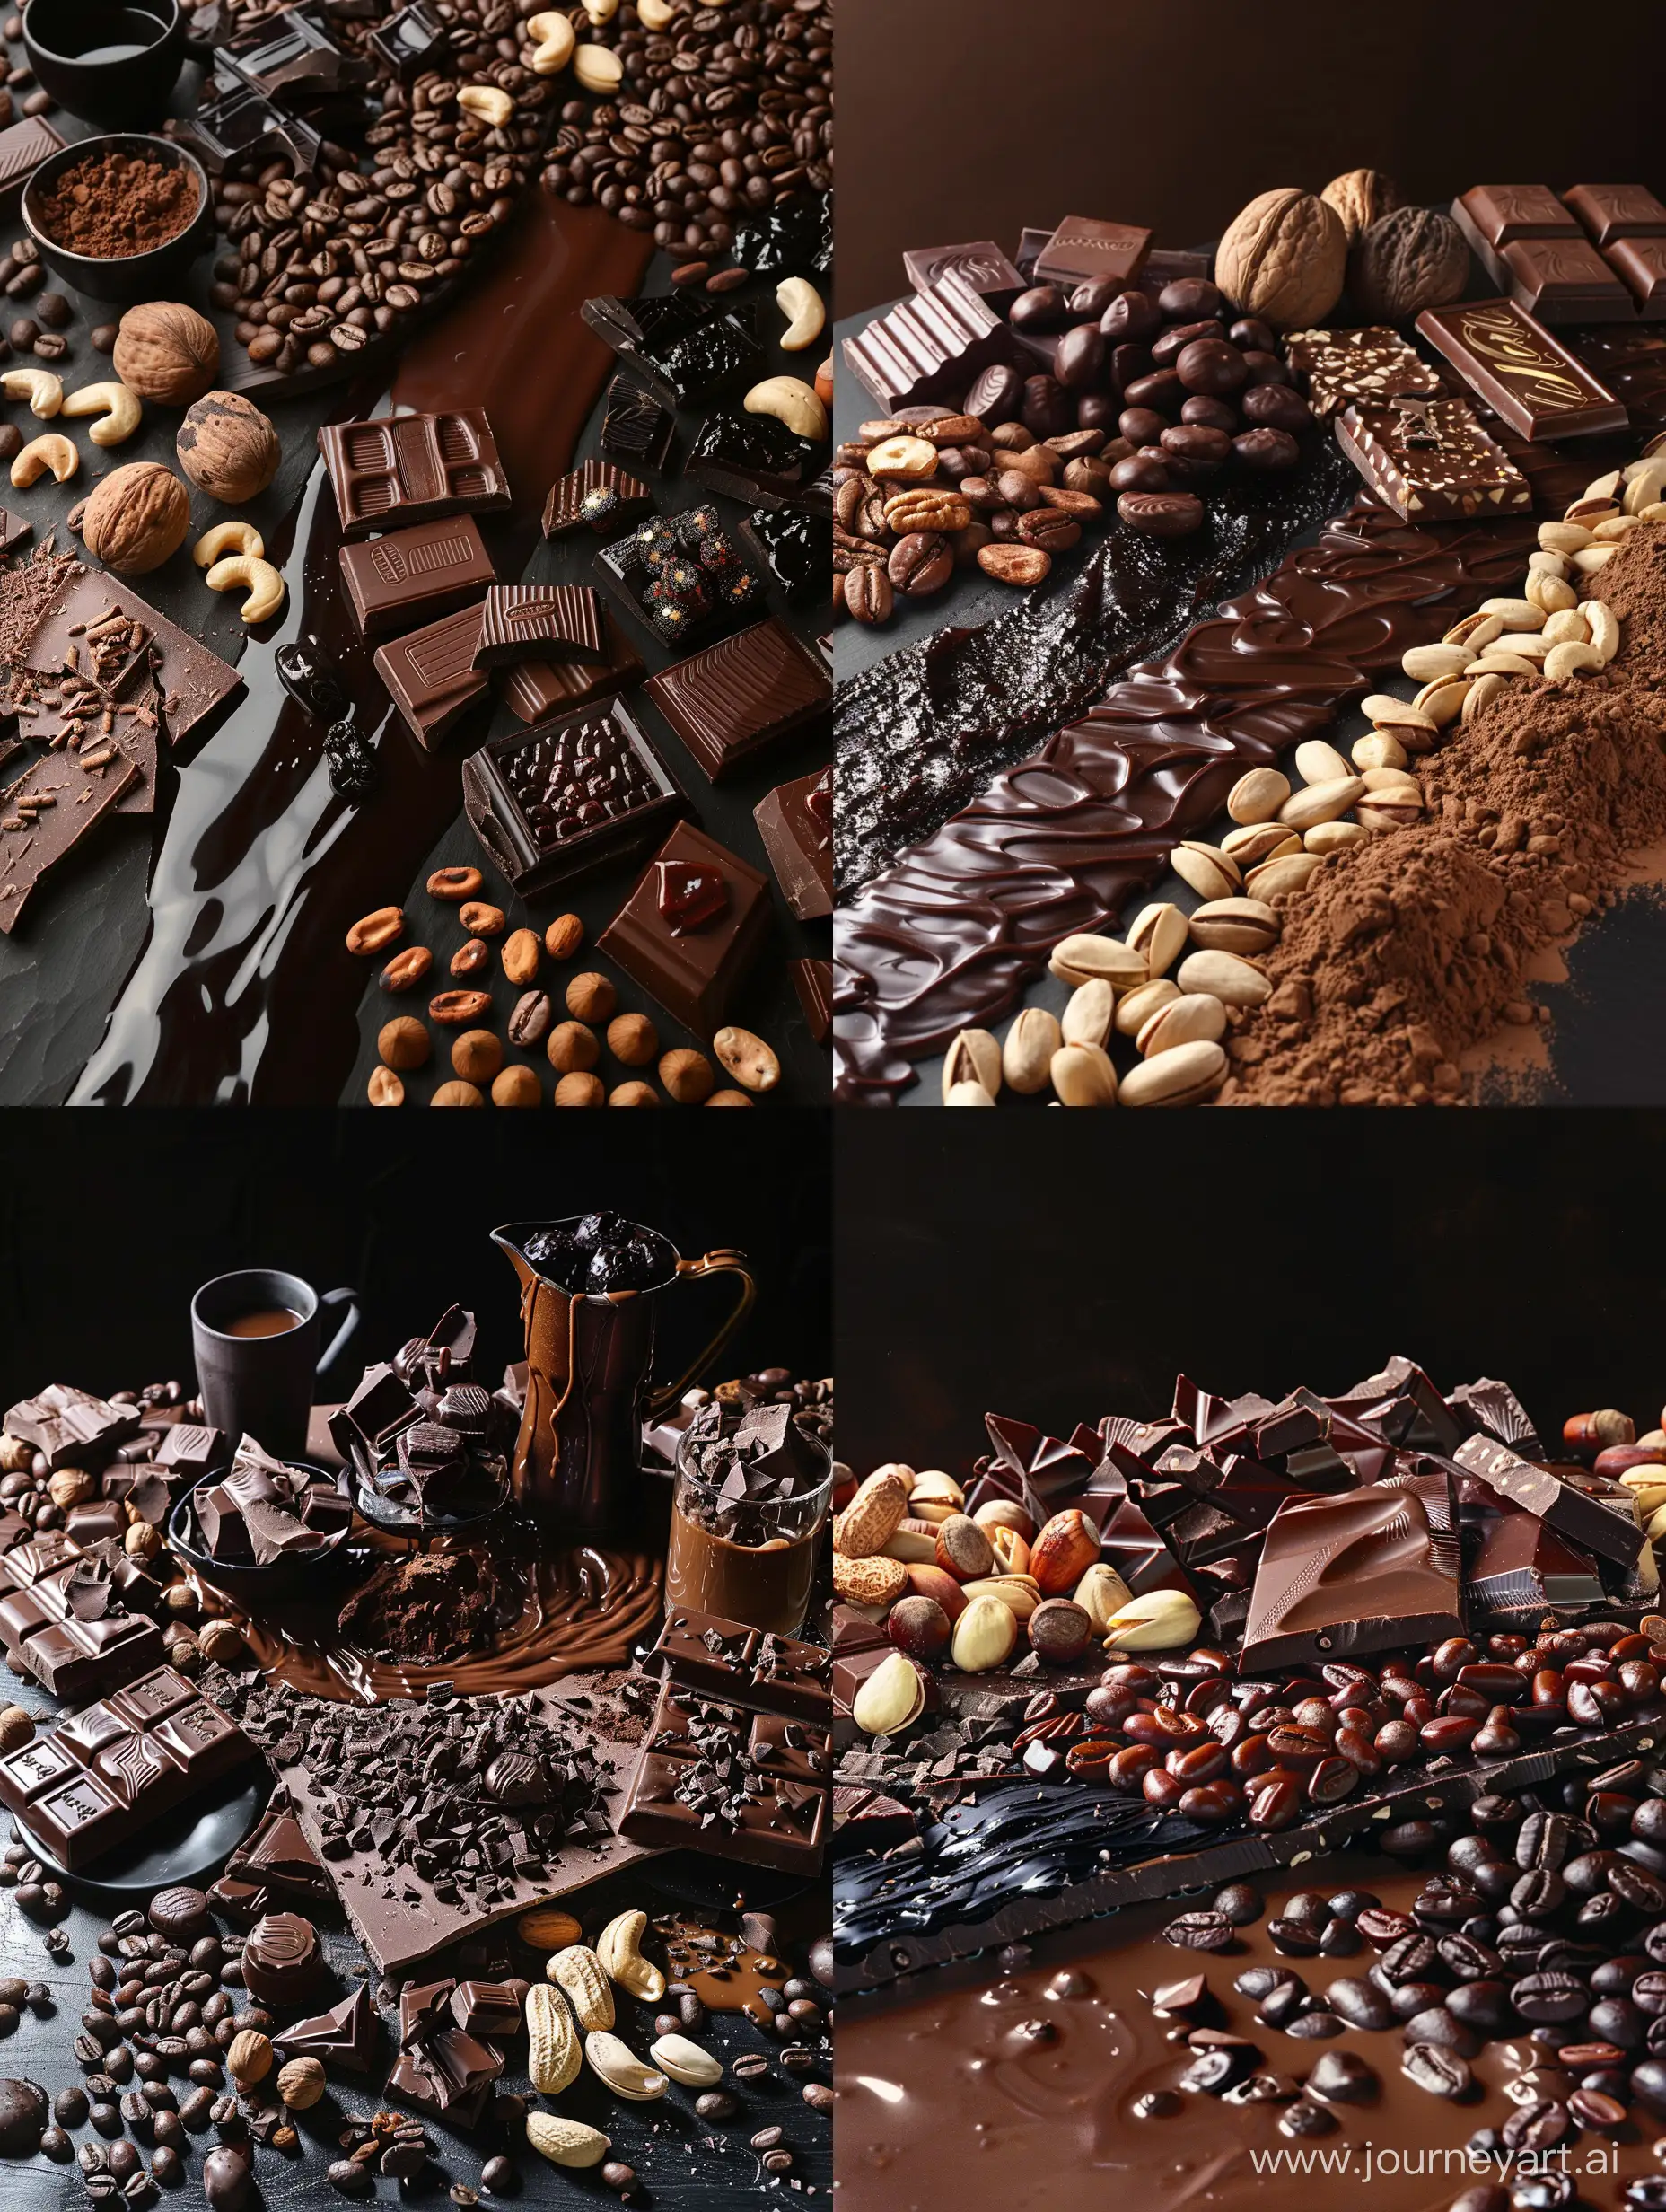 Decadent-Assorted-Chocolates-and-Nuts-Displayed-on-MochaColored-Table